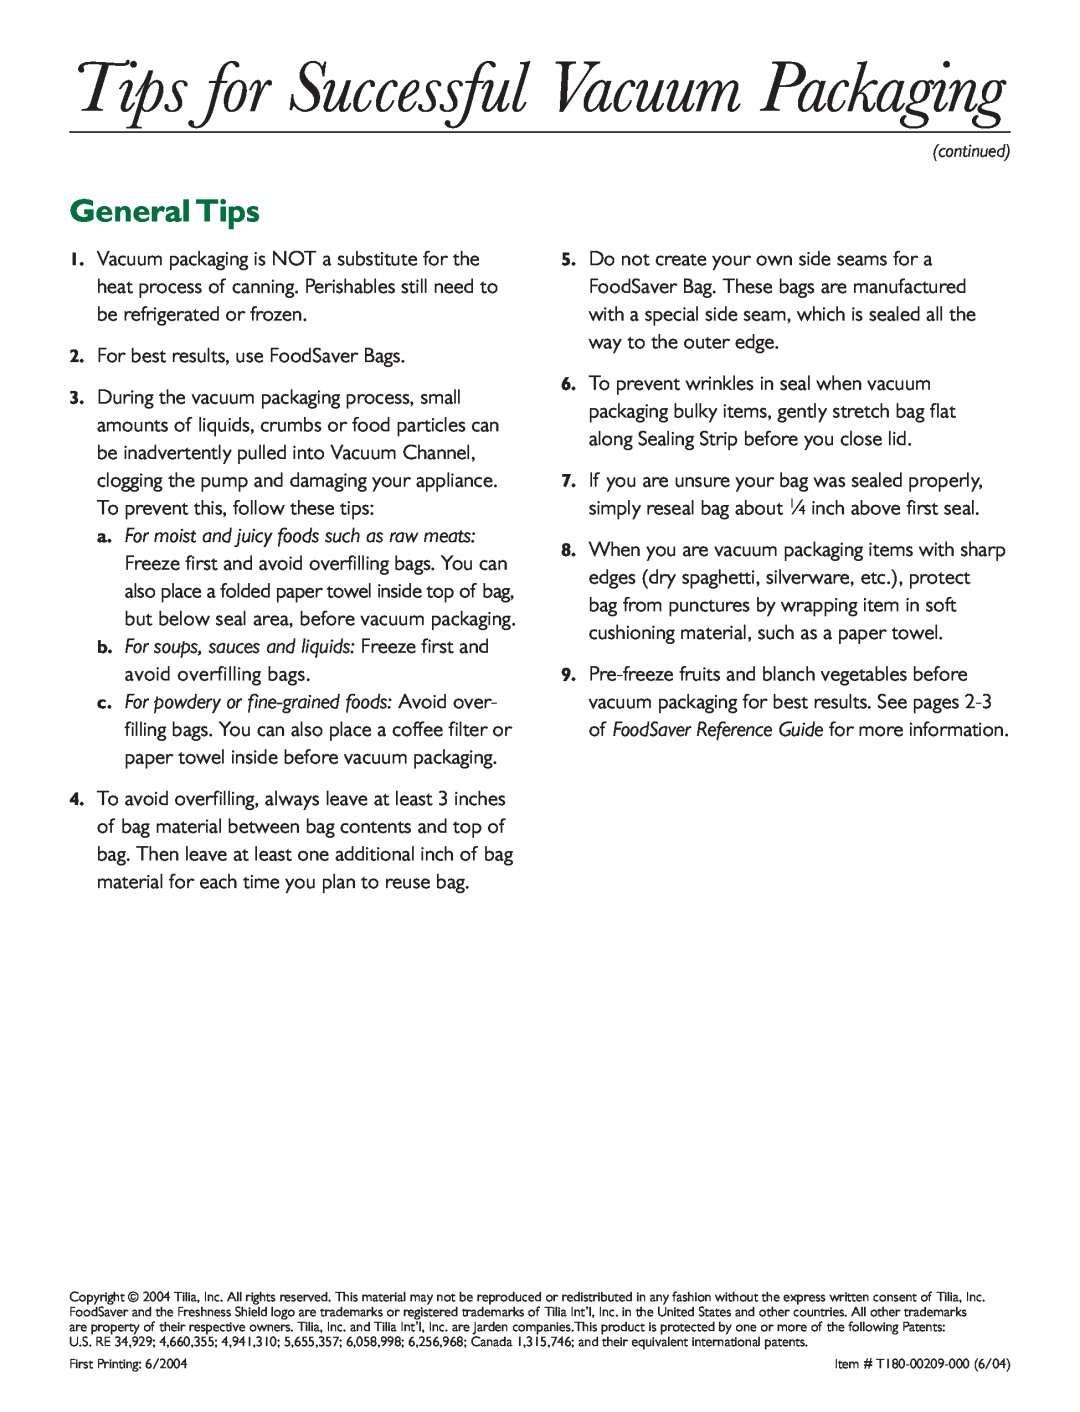 FoodSaver V240 General Tips, For best results, use FoodSaver Bags, continued, Tips for Successful Vacuum Packaging 